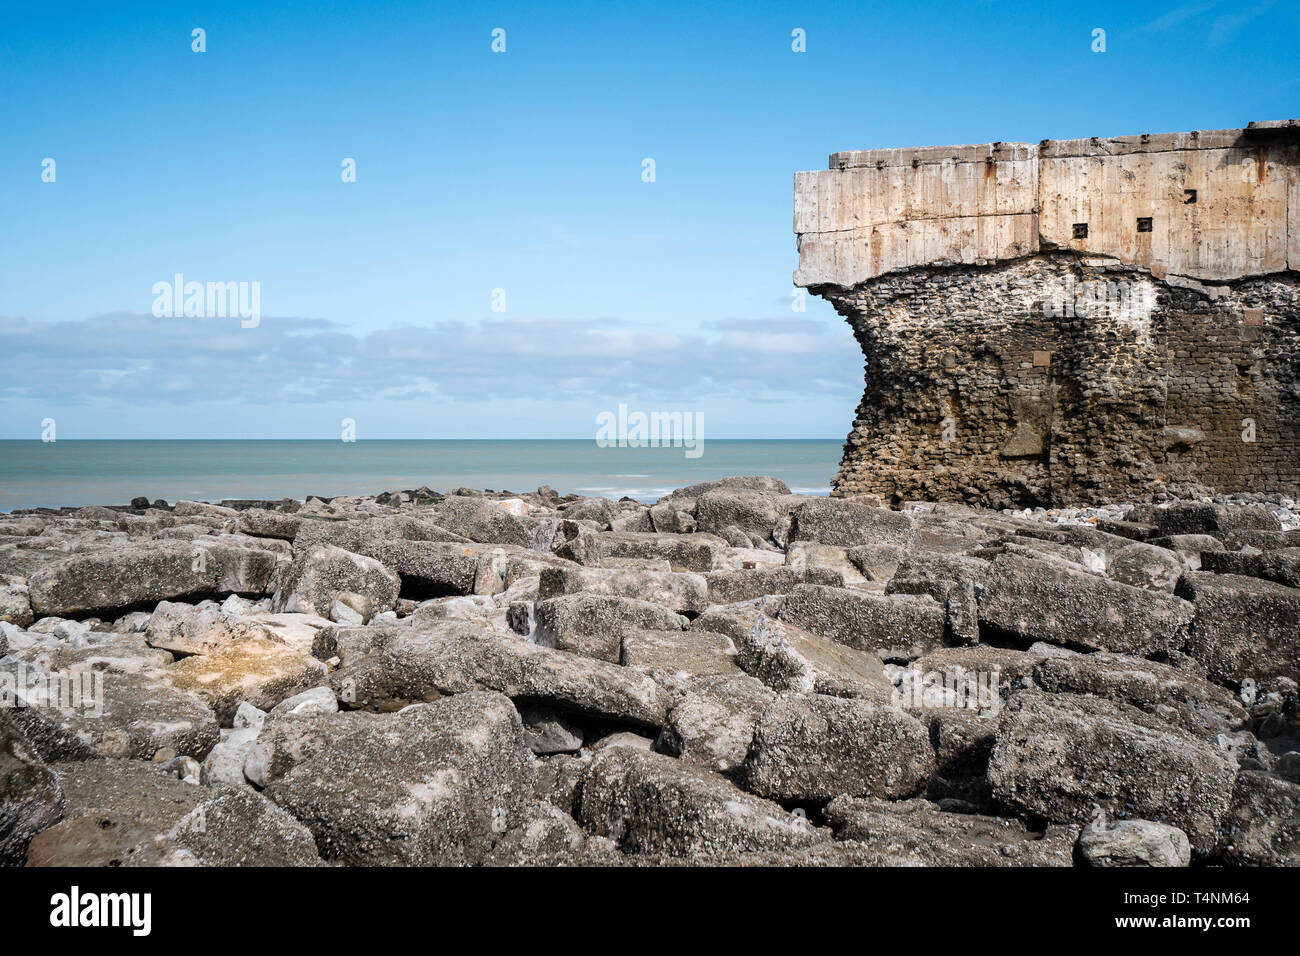 Ancient fort at the waterline with big rocks in the foreground Stock Photo